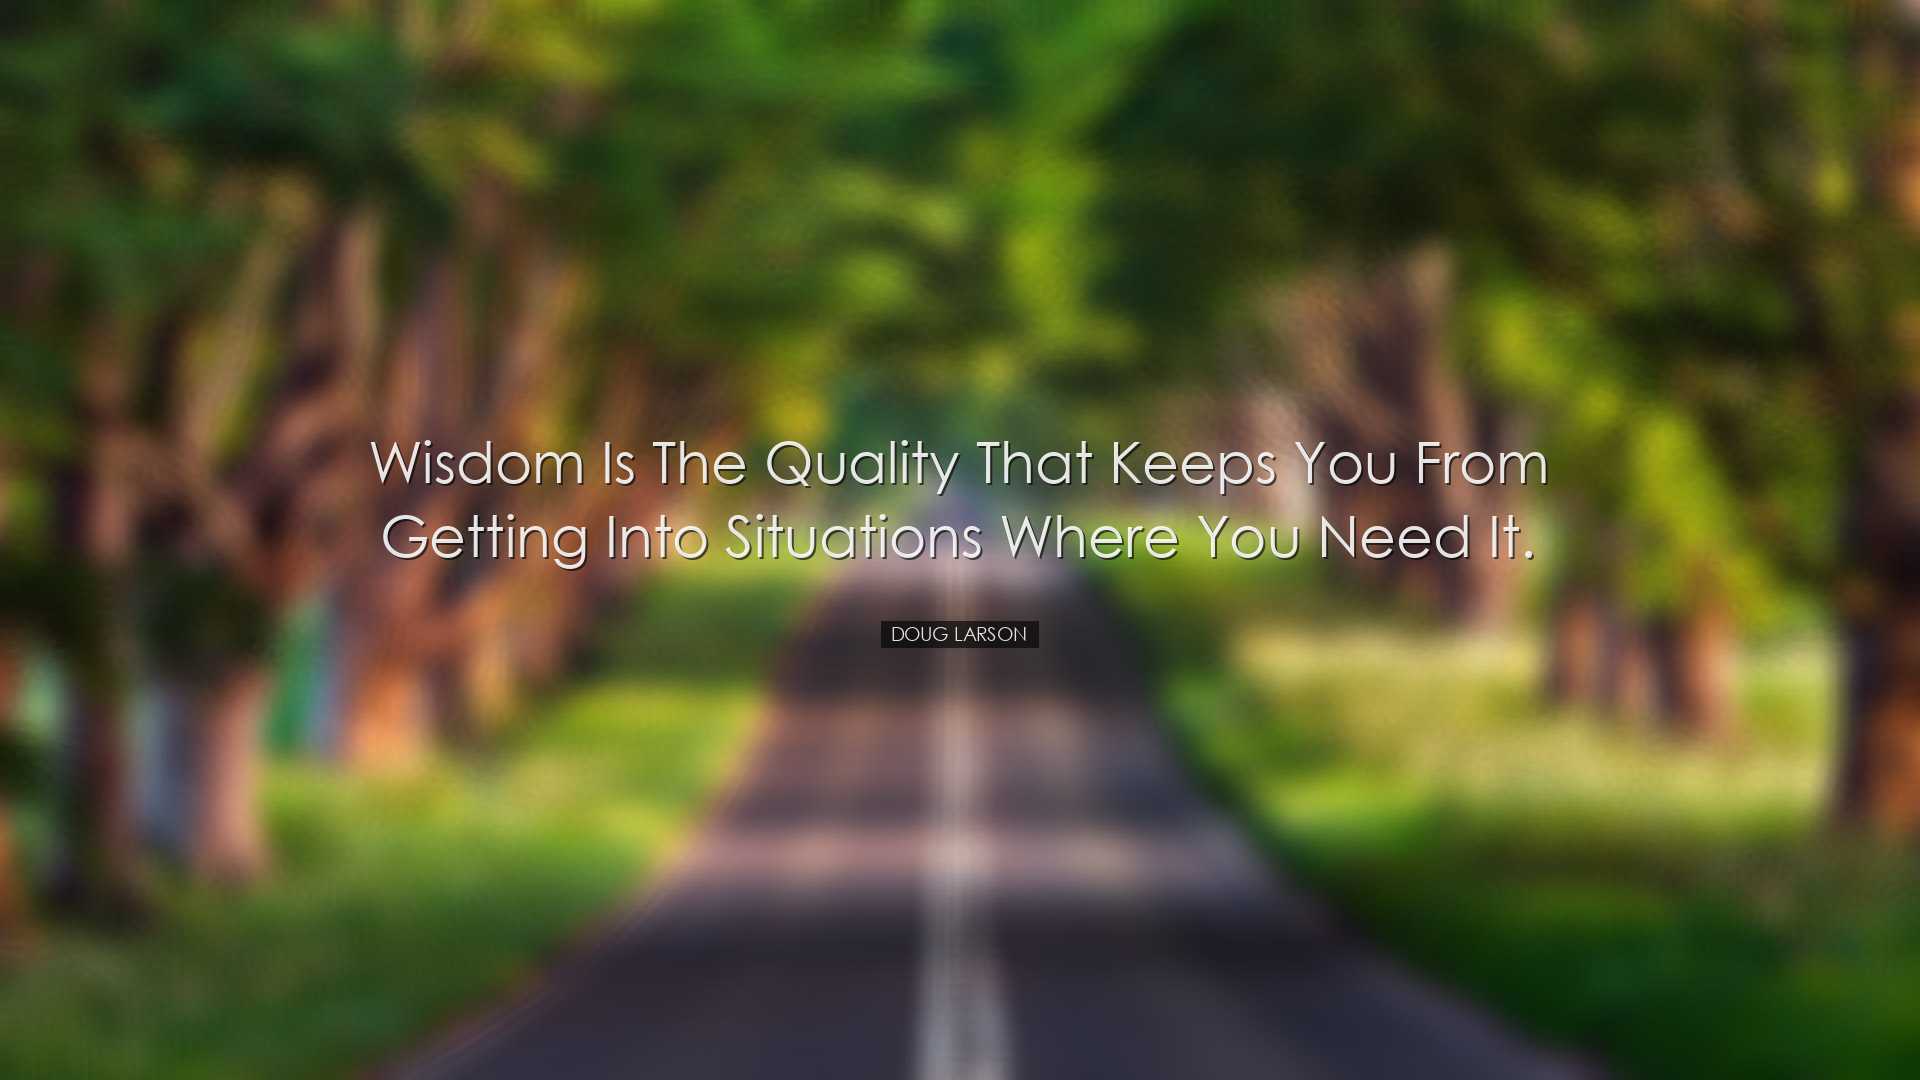 Wisdom is the quality that keeps you from getting into situations